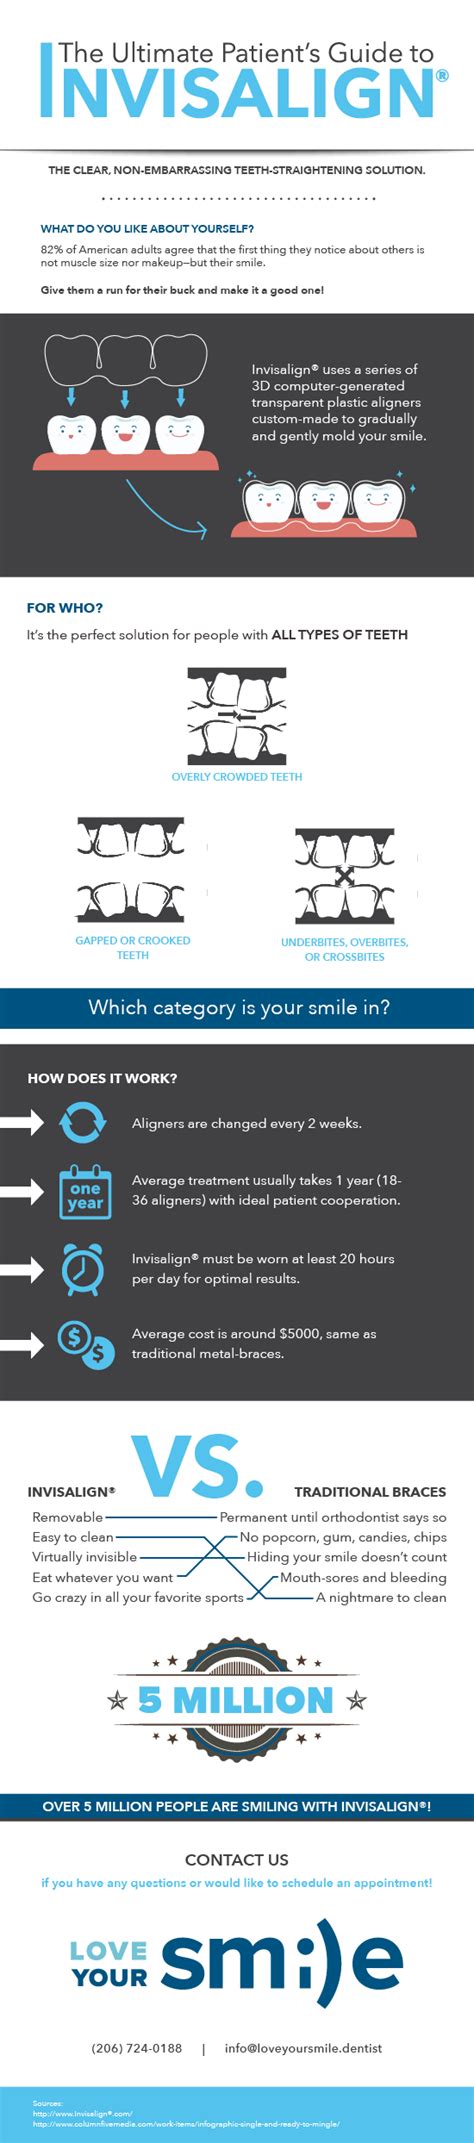 Everythign You Need To Know About Invisalign Ultimate Patients Guide